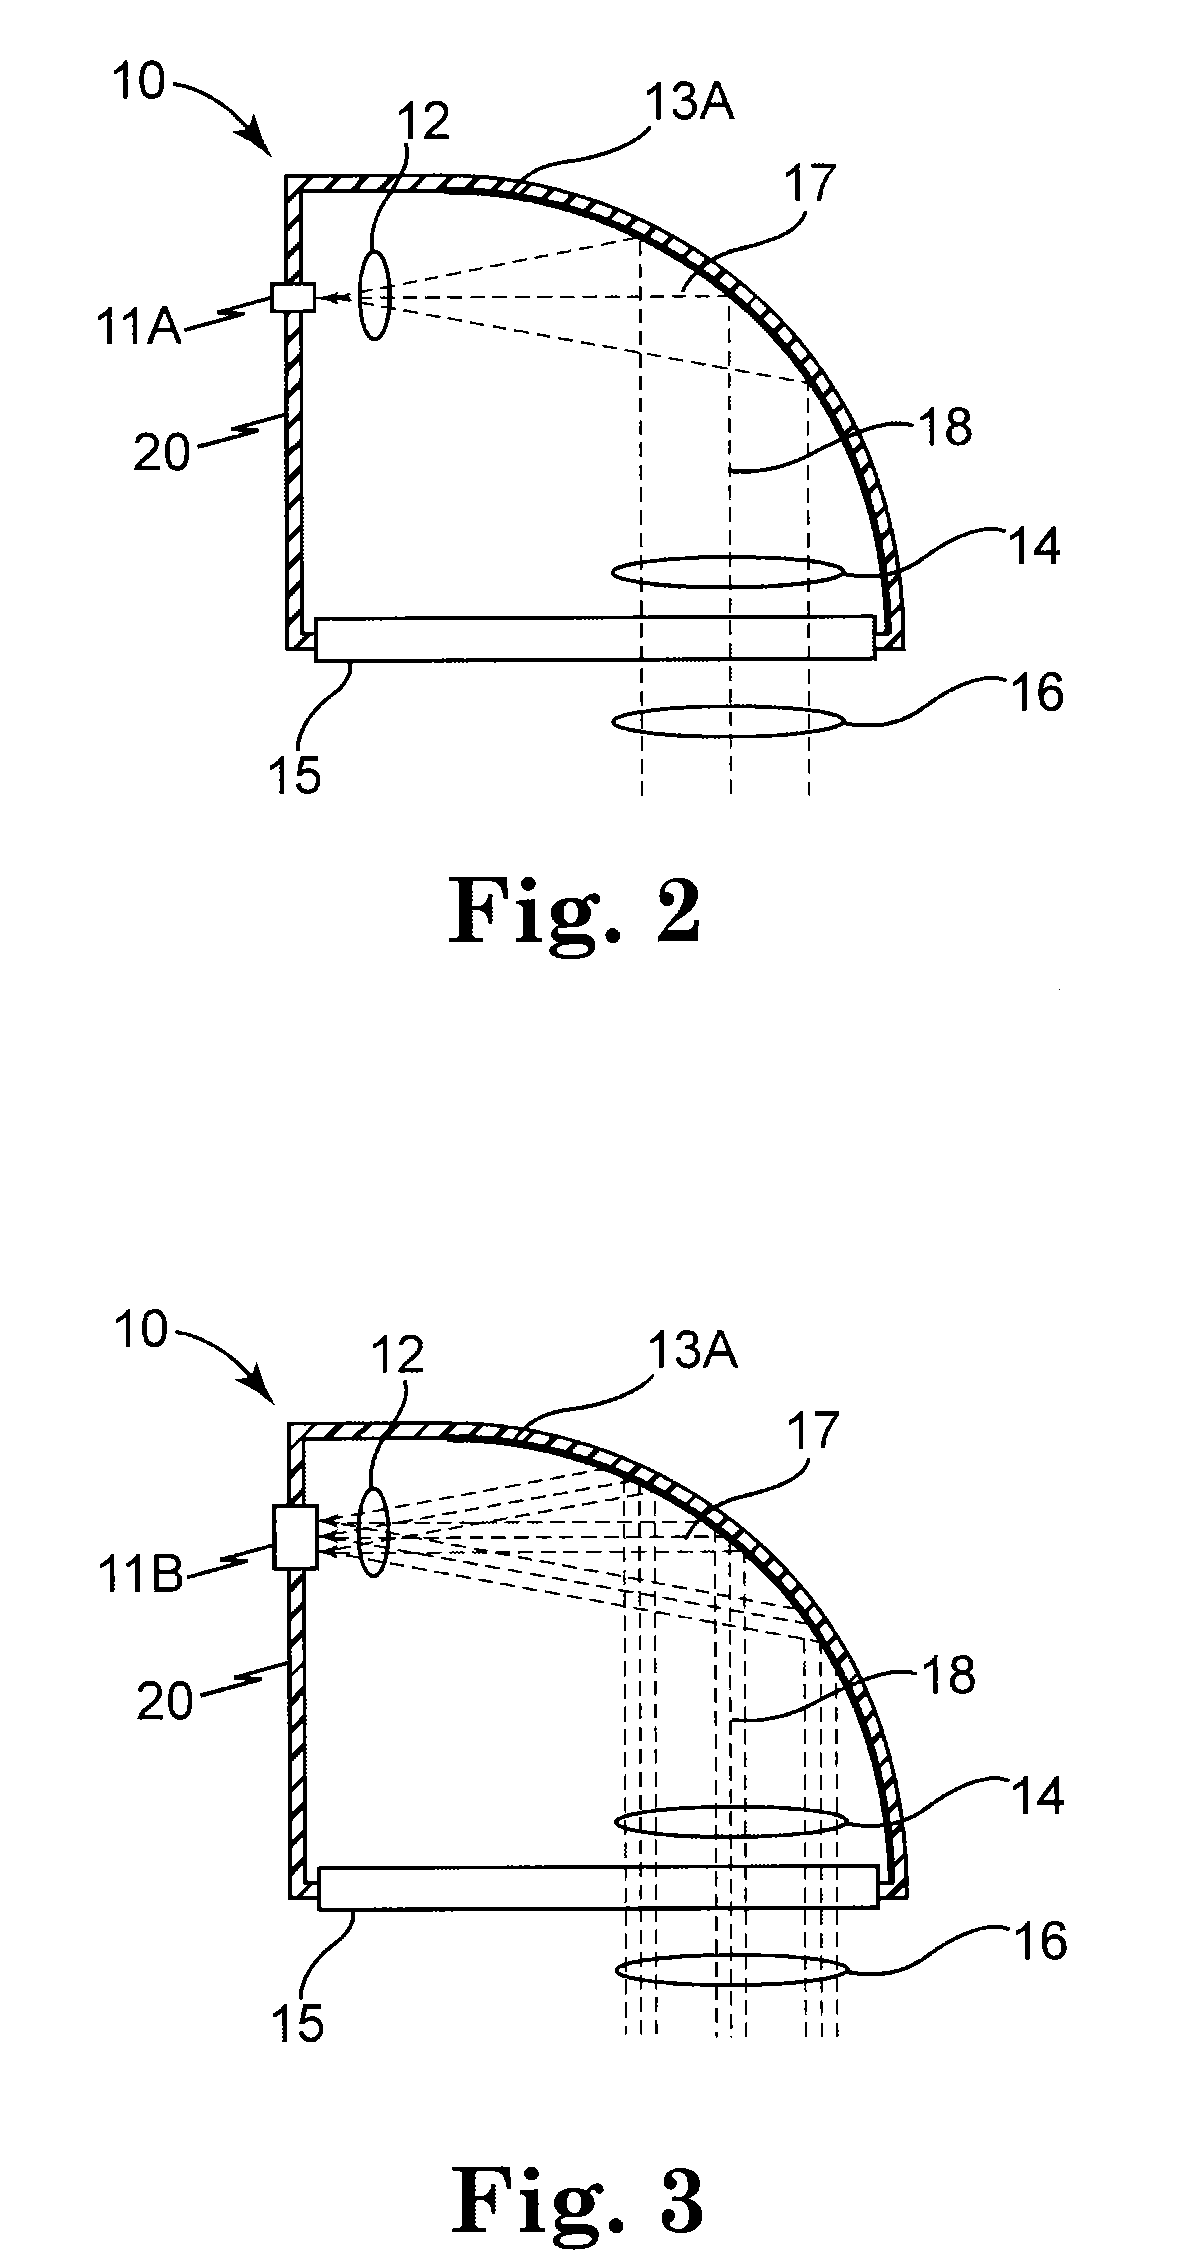 Side-loaded light emitting diode module for automotive rear combination lamps